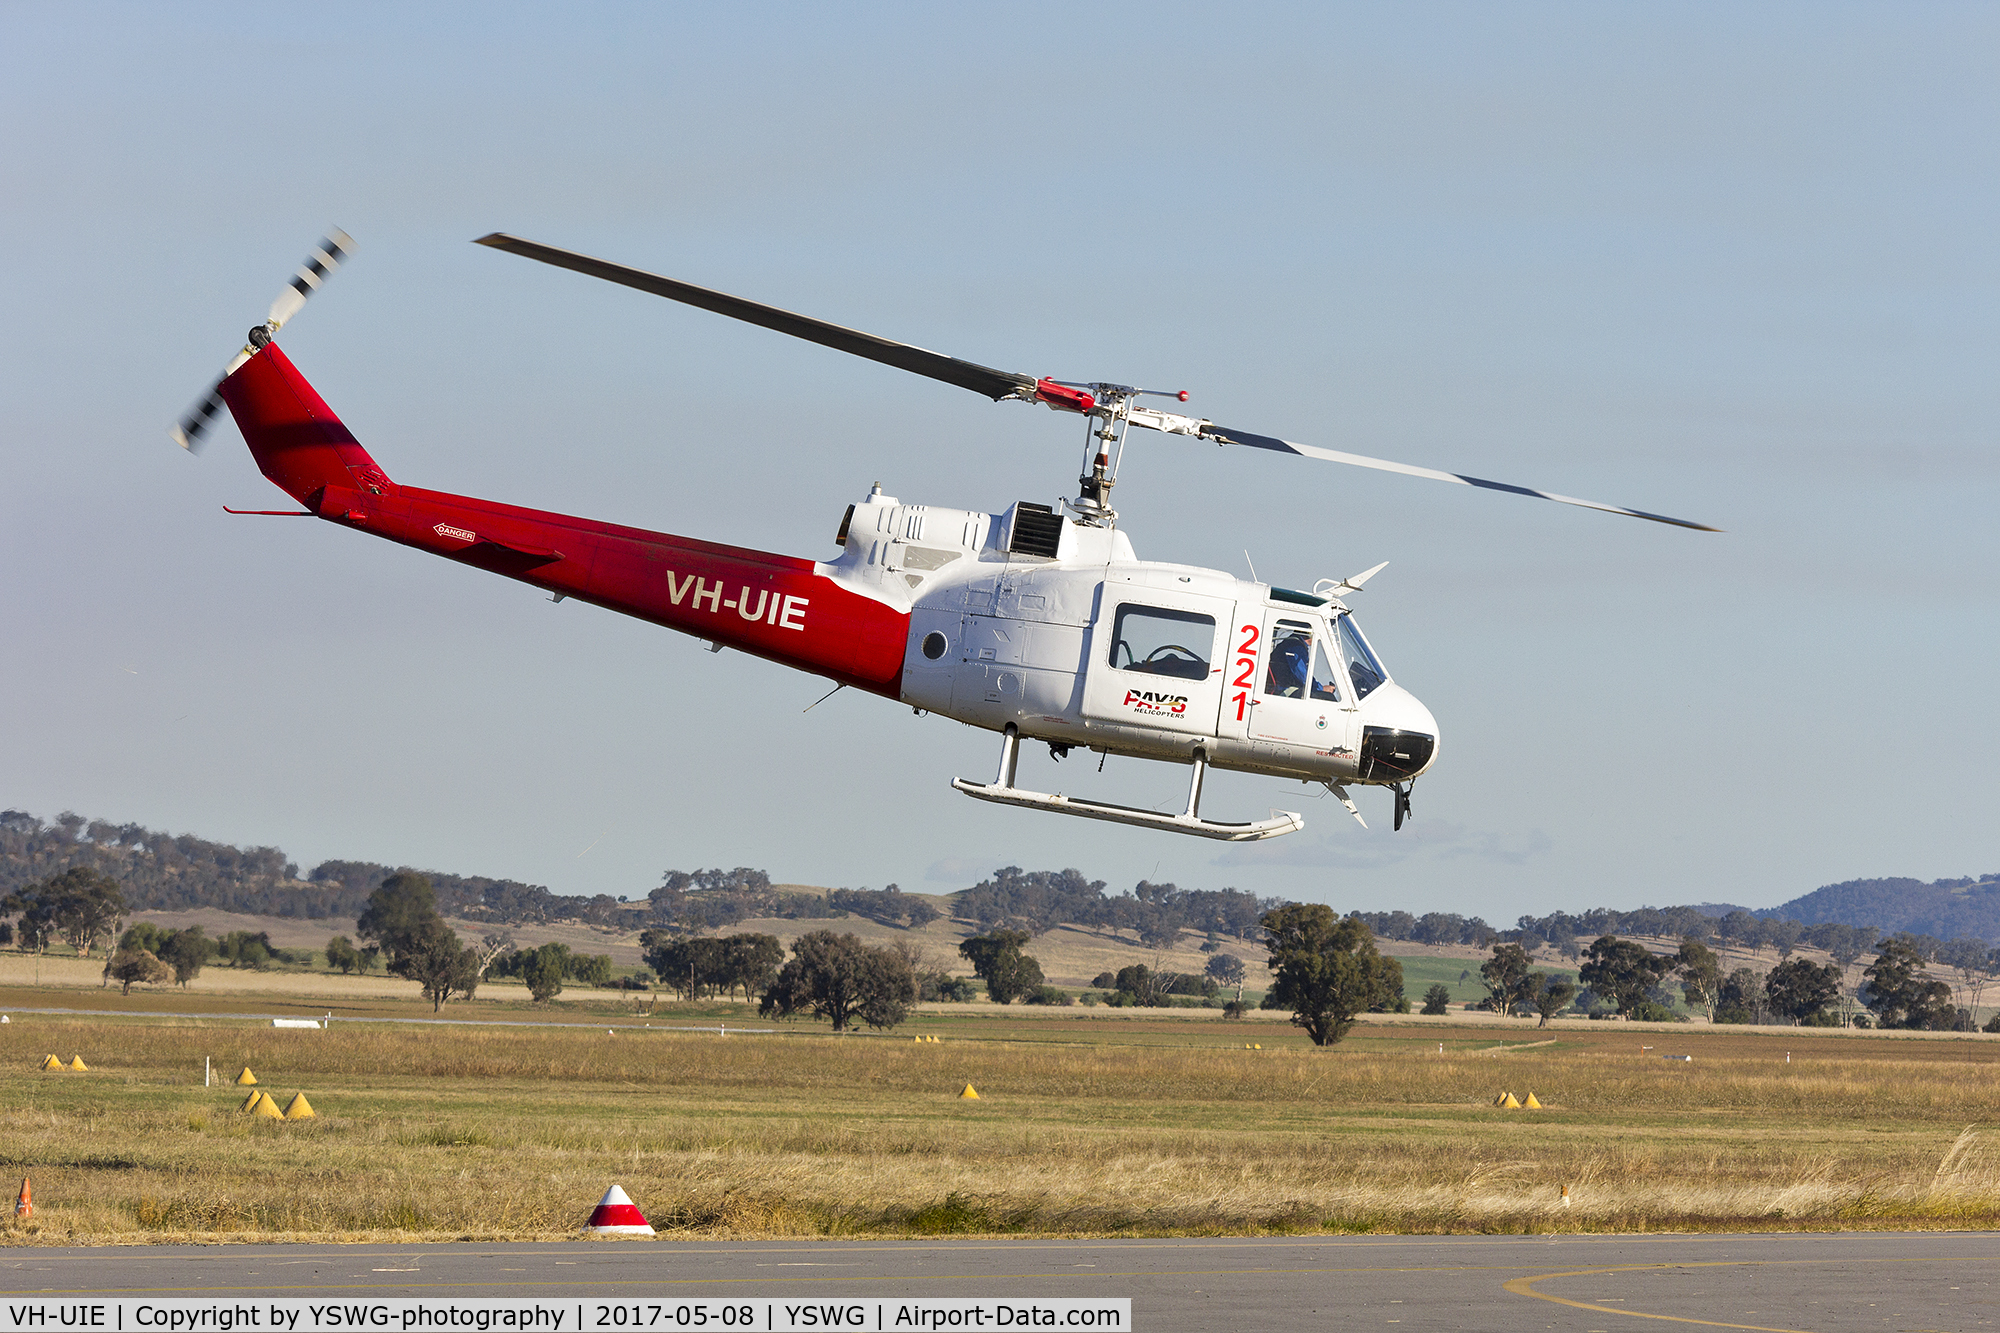 VH-UIE, 1967 Bell UH-1E Iroquois C/N 6199, Pay's Helicopters (VH-UIE) Bell UH-1E Iroquois at Wagga Wagga Airport